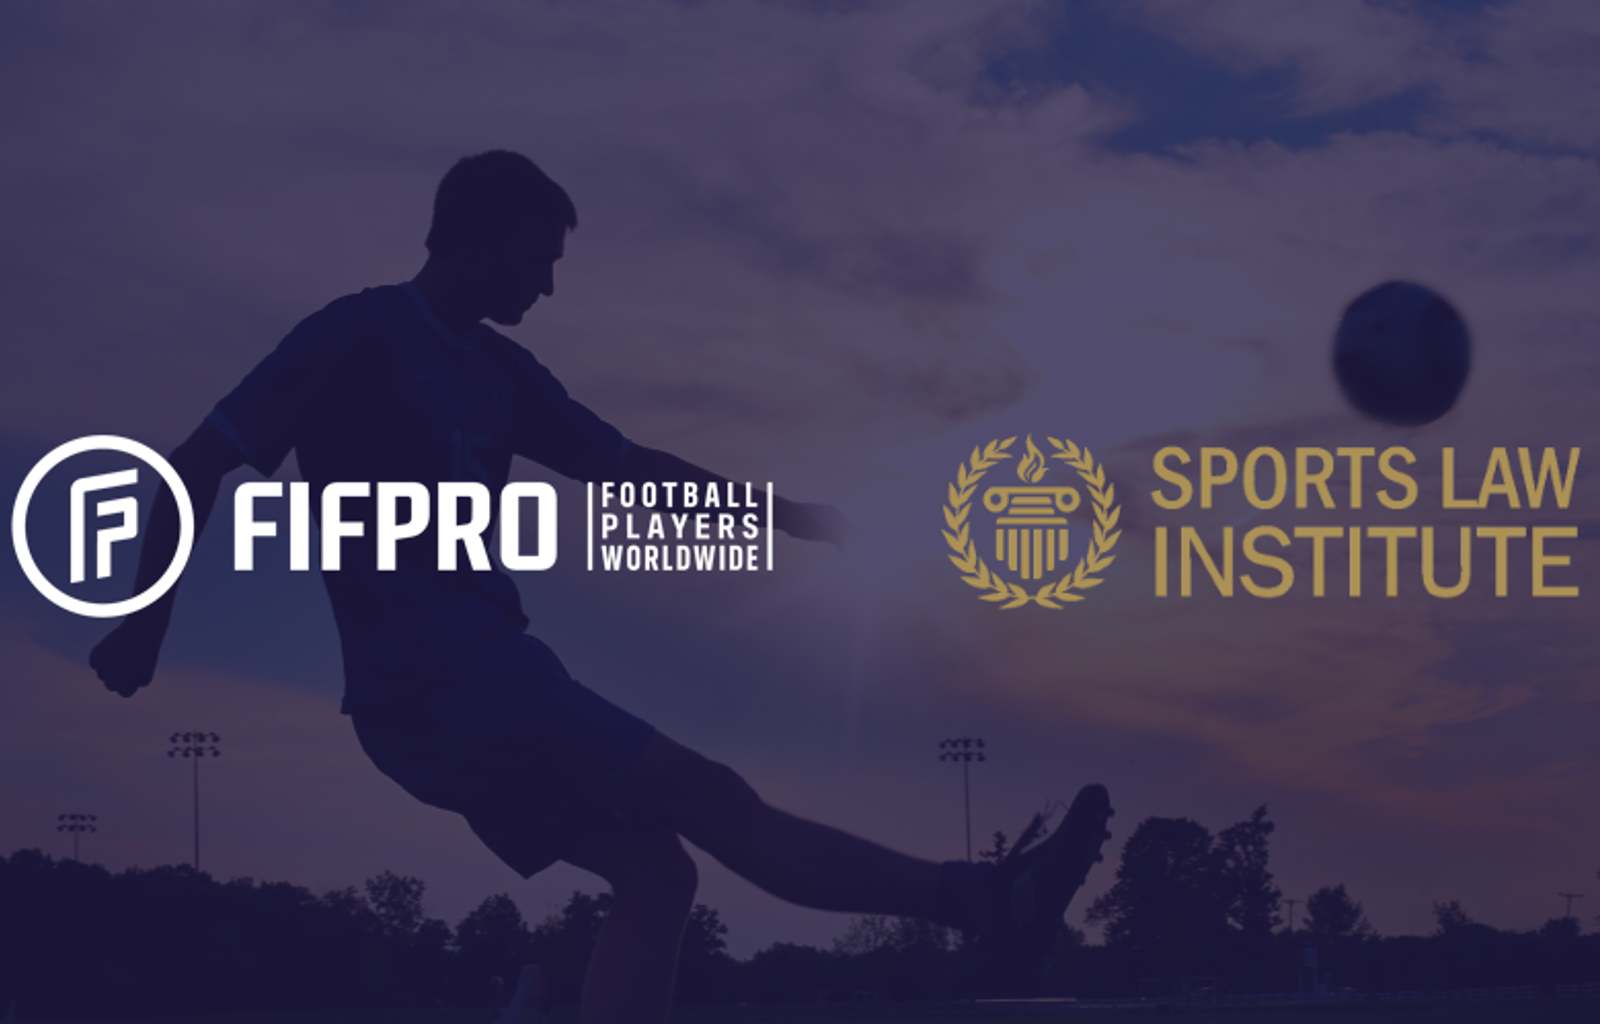 FIFPRO And Sports Law Institute